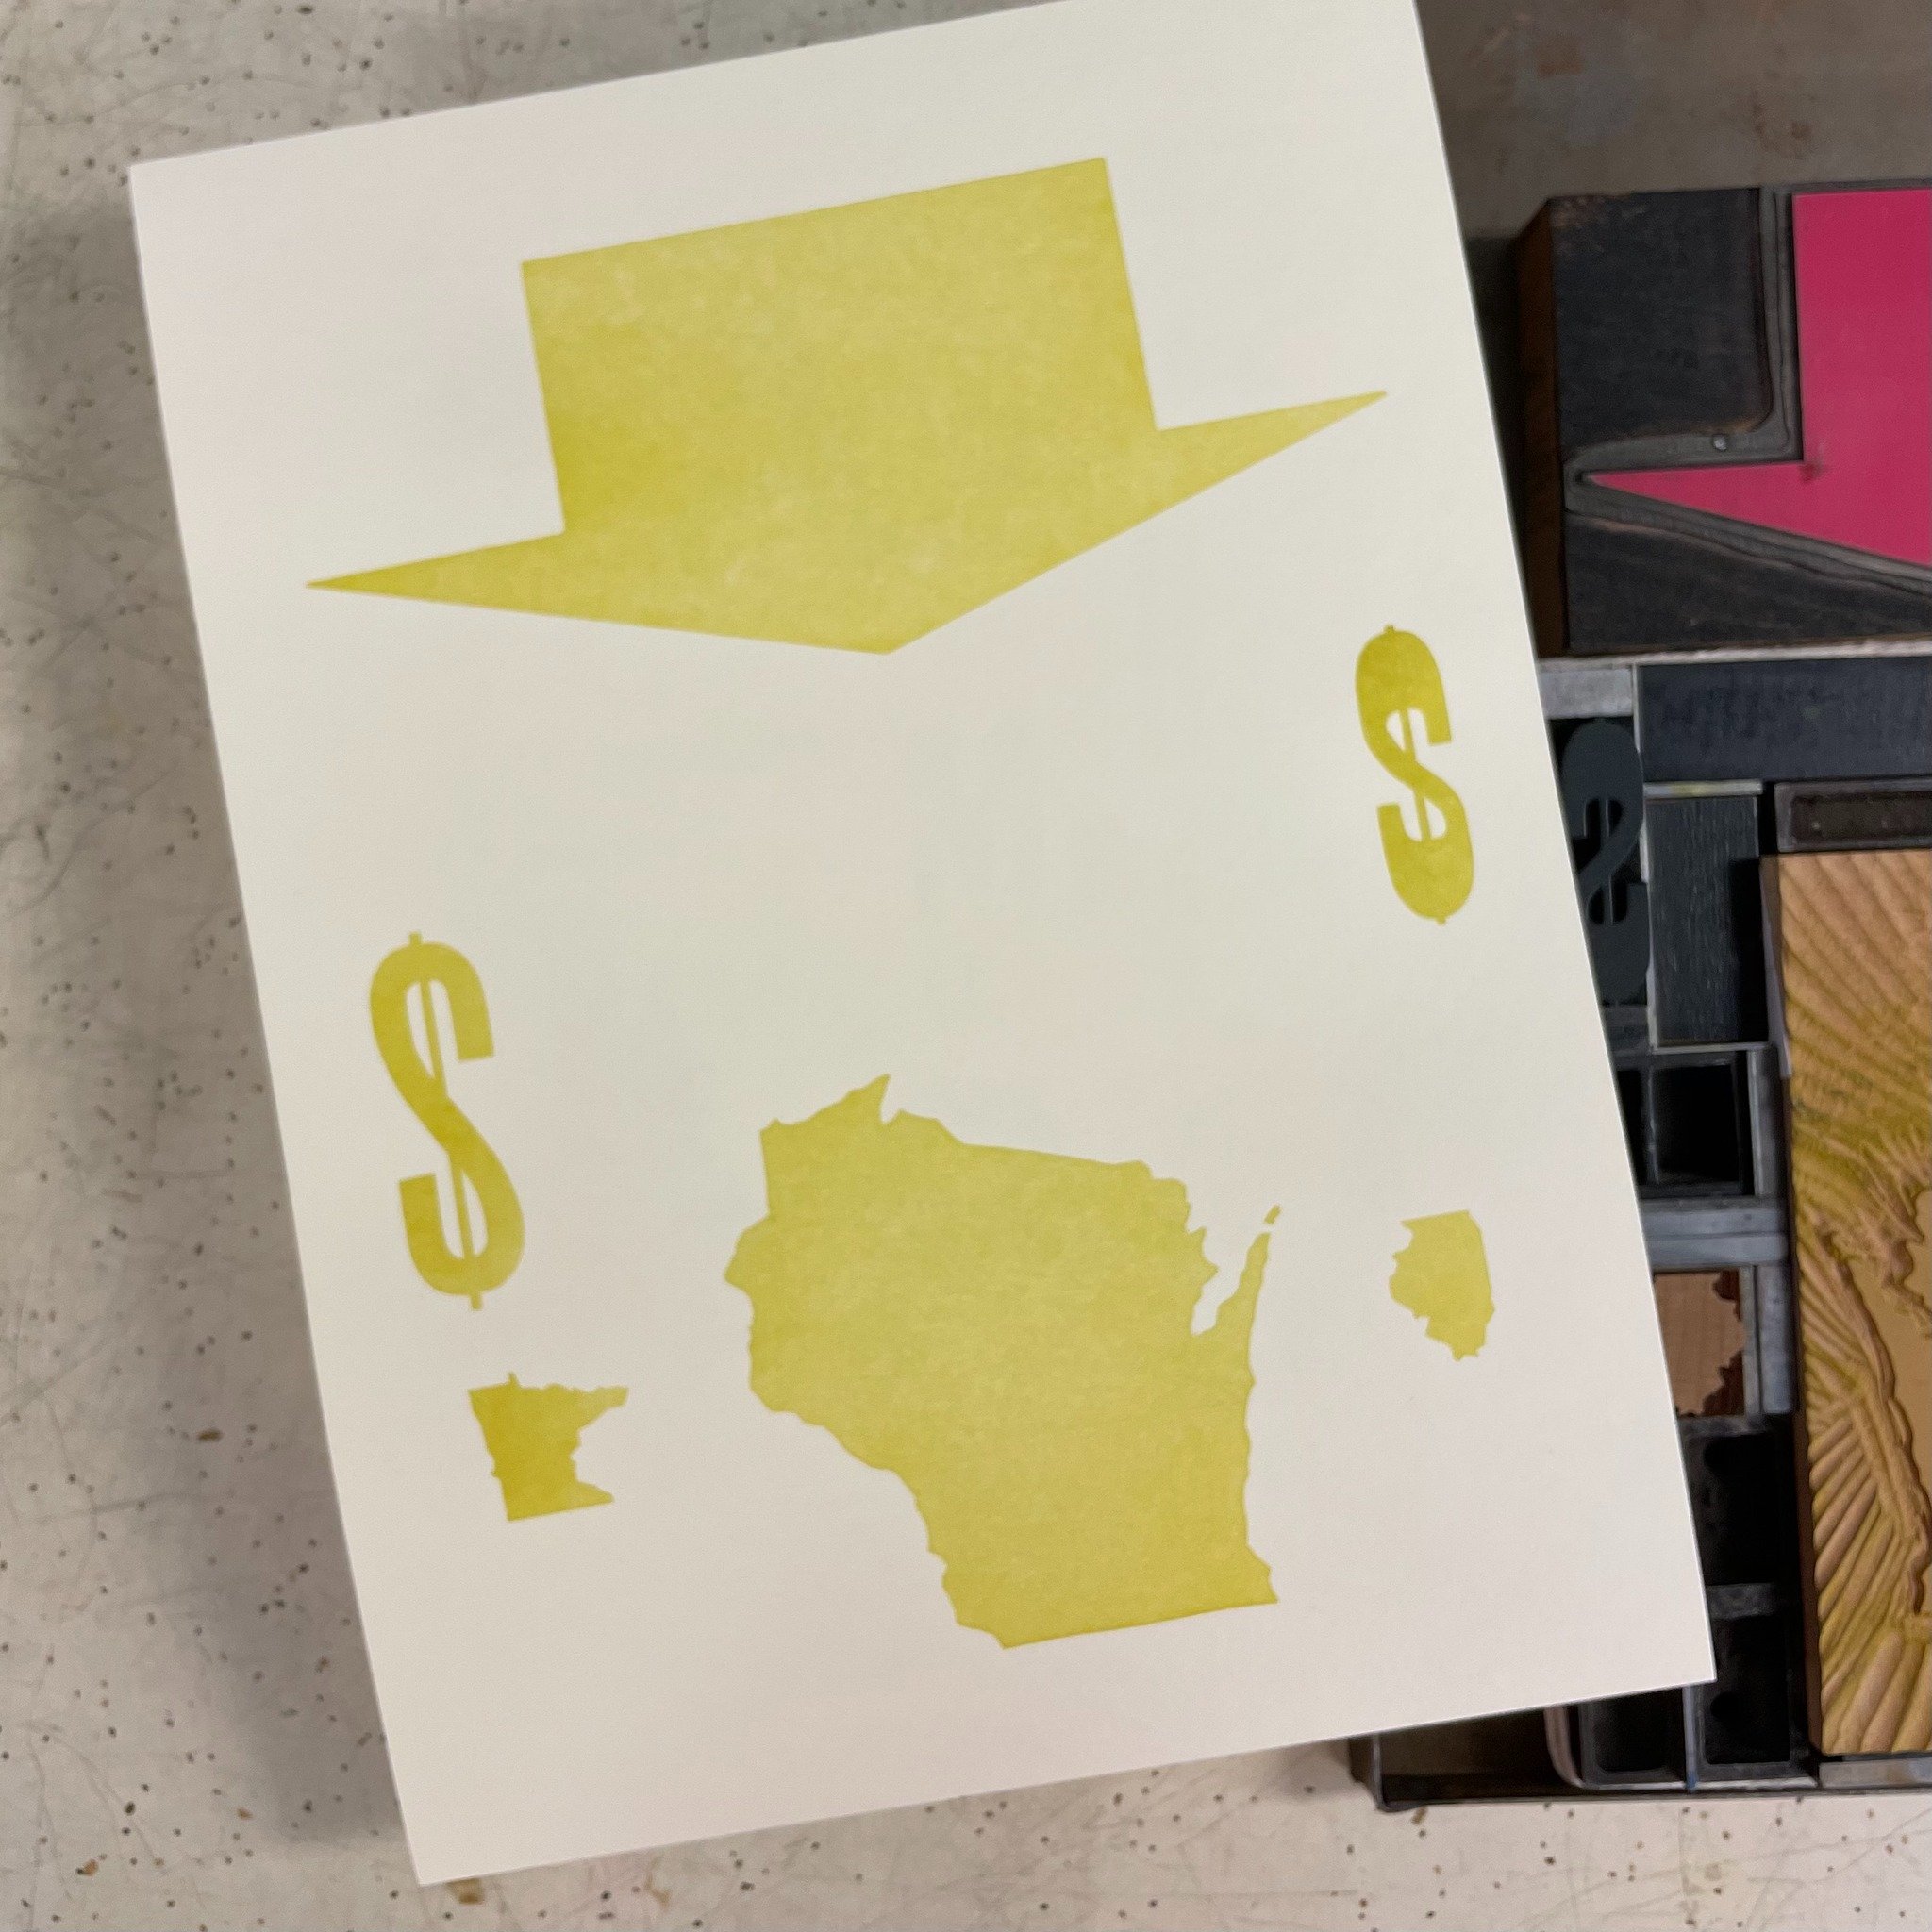 First color of a free make-and-take print we'll have during the Spring Art Tour. Can you guess what the topic might be? Solve the mystery by visiting our studio to pull the second color! May 17, 18 &amp; 19, 10 a.m. - 5 p.m. daily. Tour details at Sp